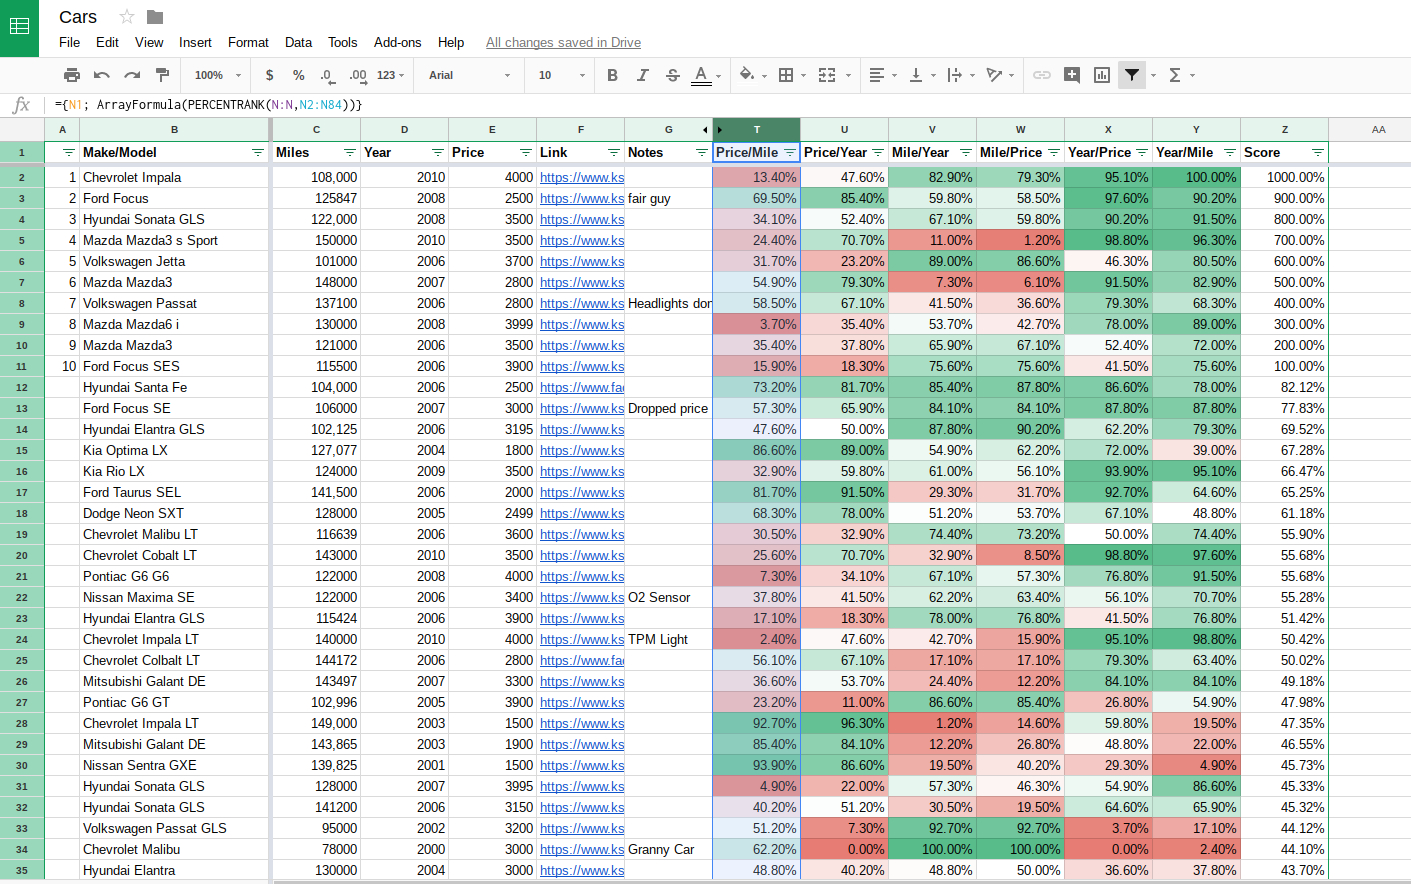 Car Buying Comparison Spreadsheet Intended For My Crazy Car Comparison Spreadsheet. Helping Me Buy My Next Car